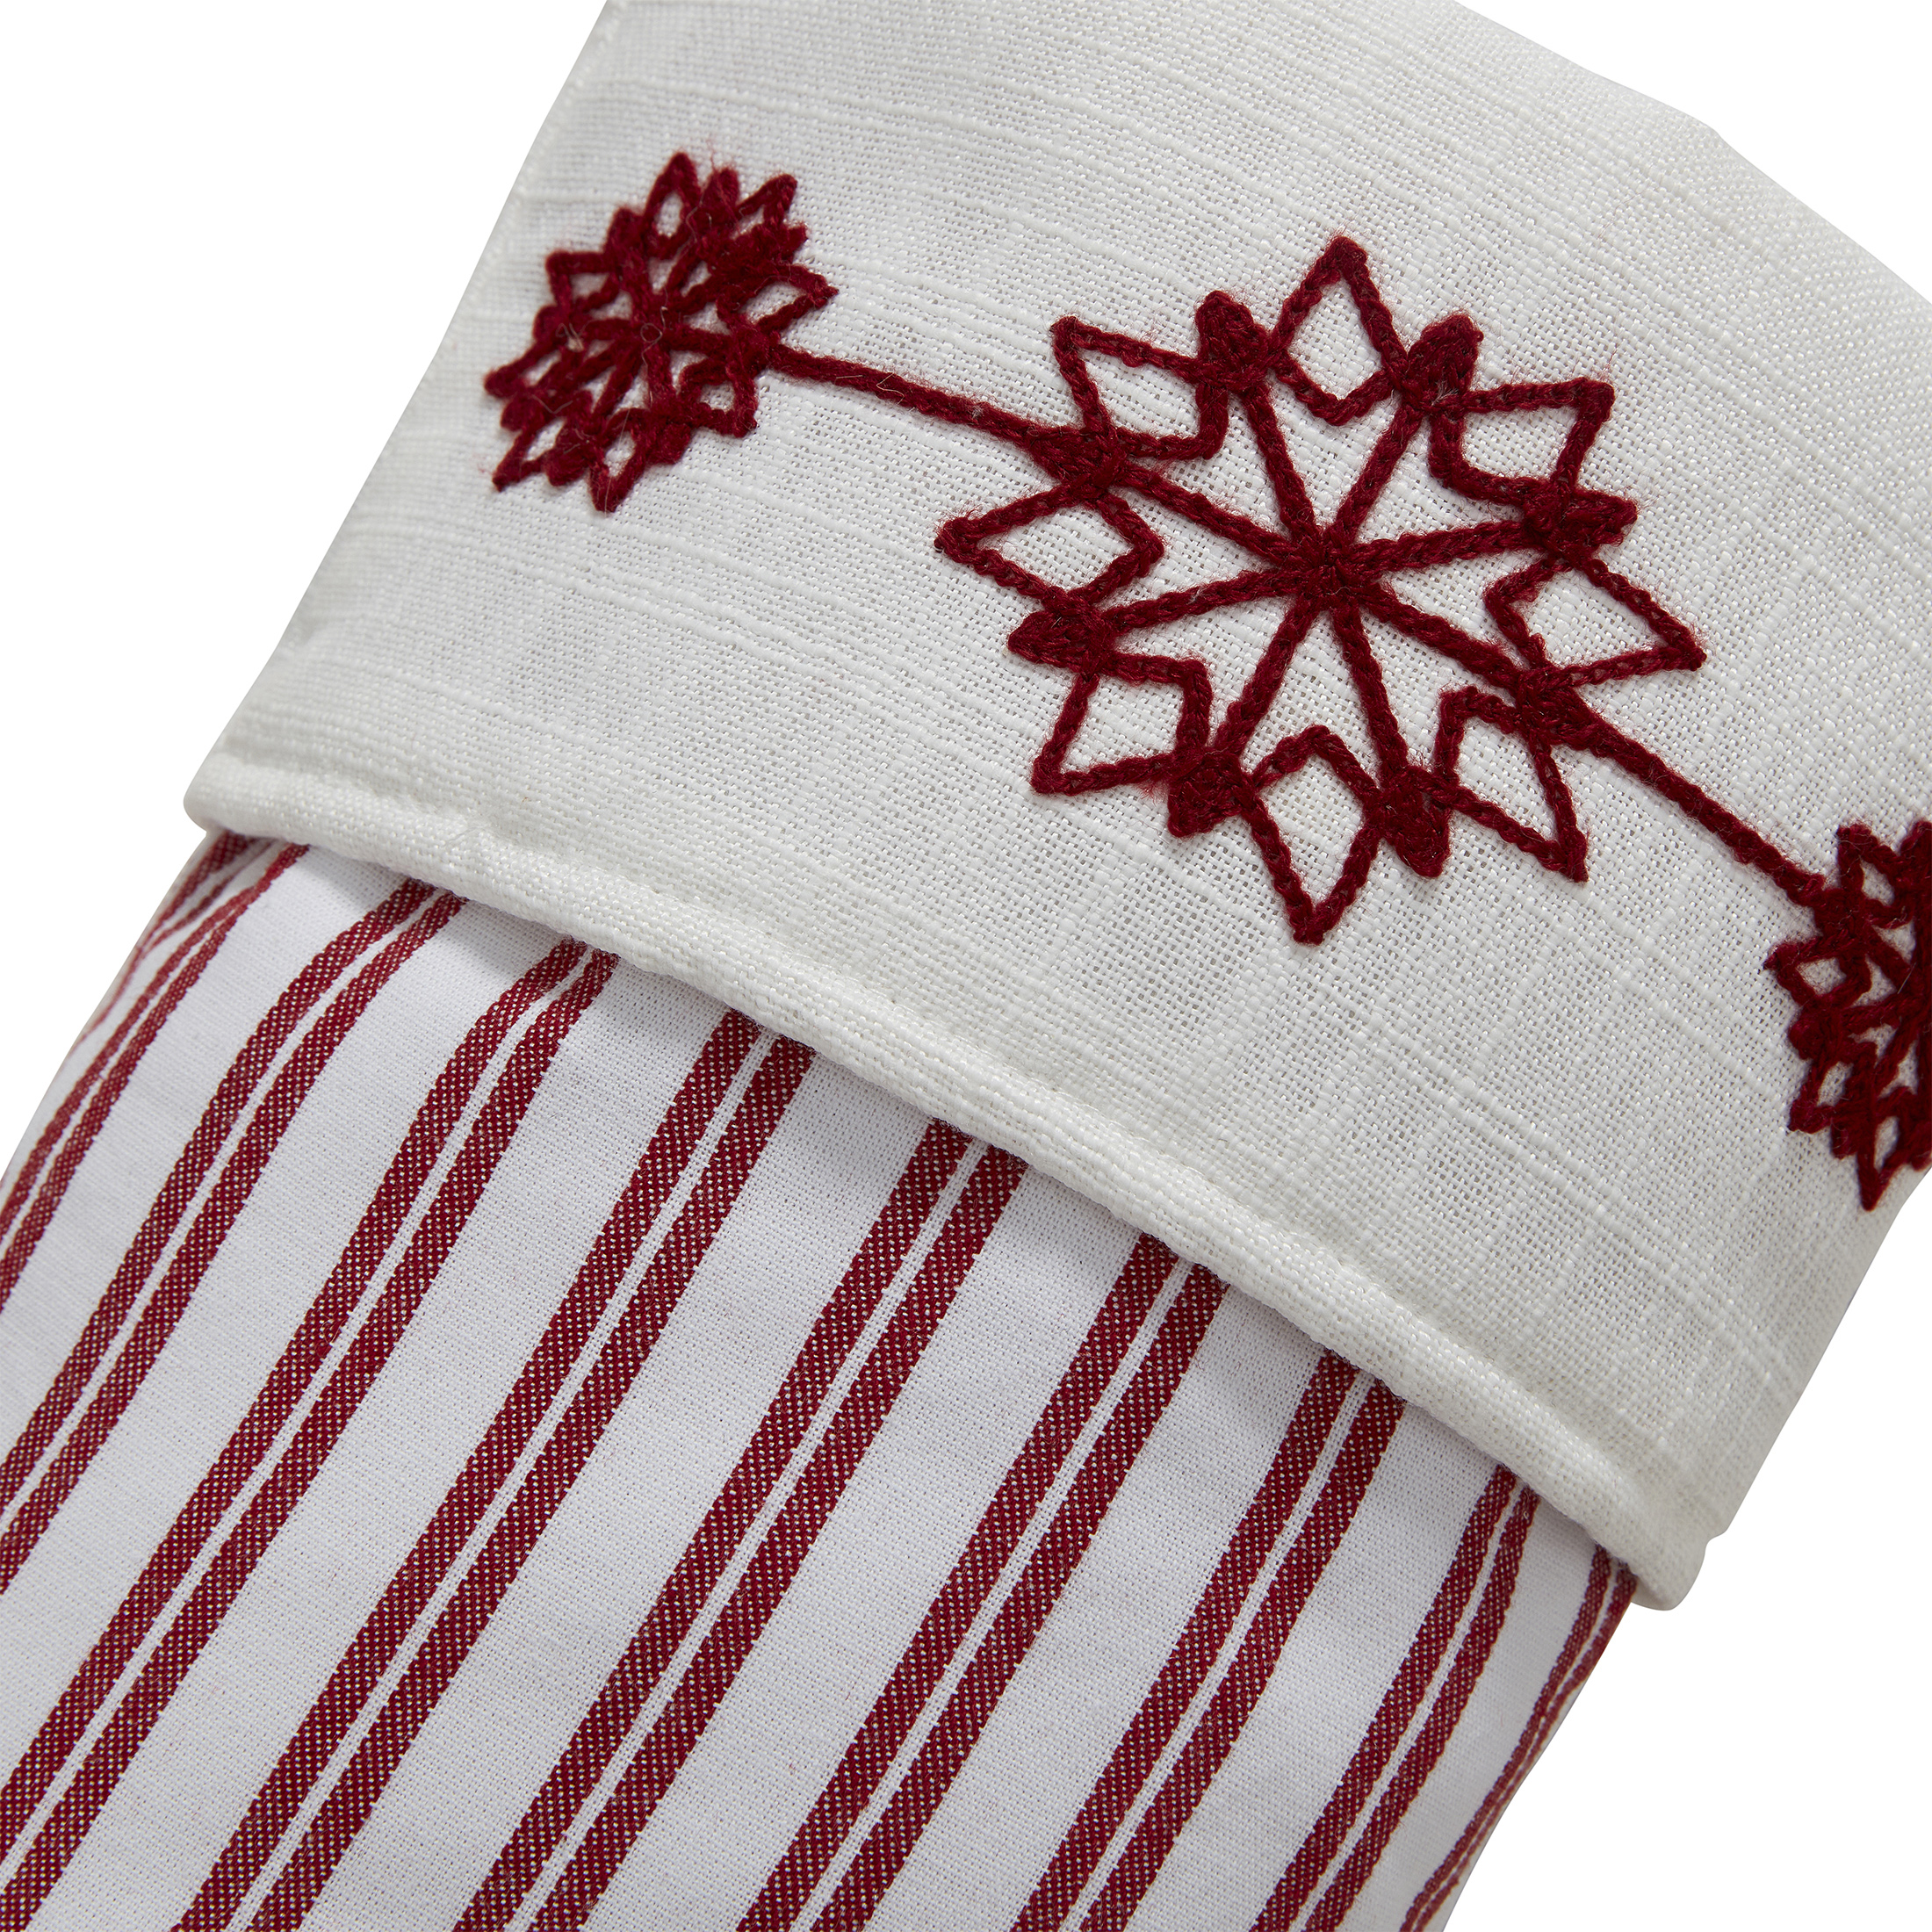 My Texas House Fallon Red Snowflake Christmas Stockings, 21" (2 Count) - image 5 of 6